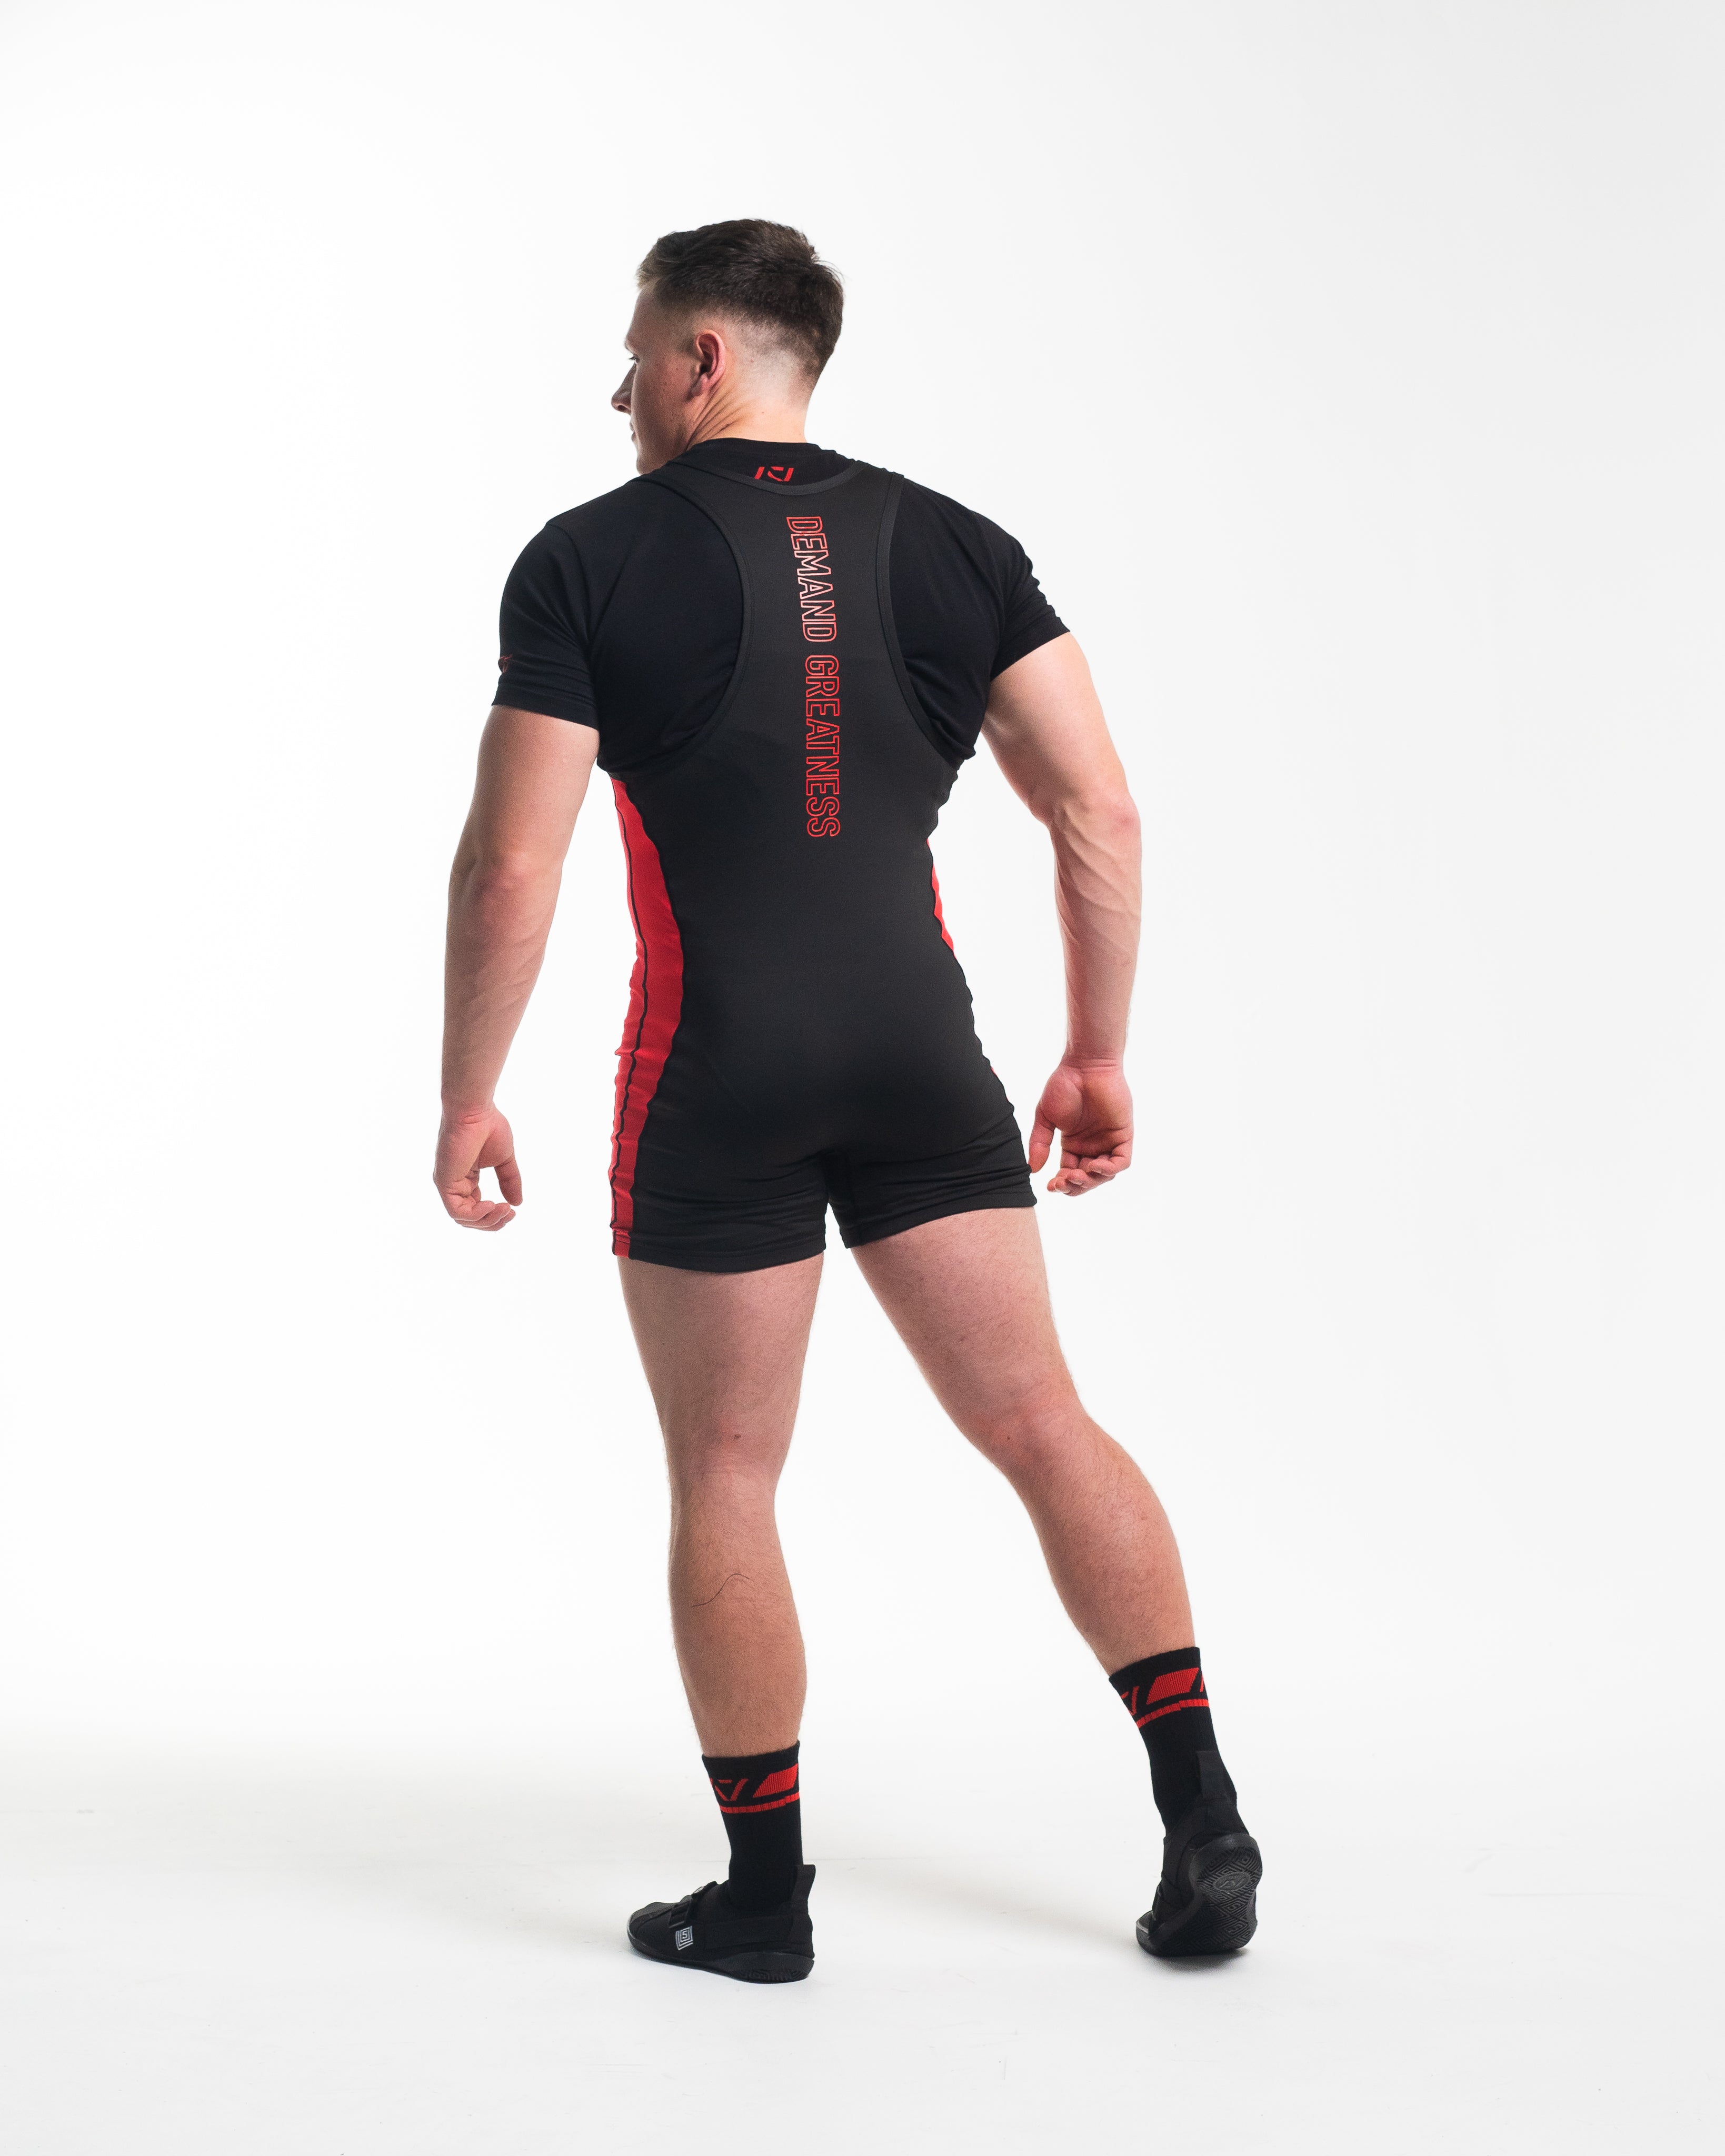 A7 IPF Approved Red Dawn Luno singlet with extra lat mobility, side panel stitching to guide the squat depth level and curved panel design for a slimming look. The Women's singlet features a tapered waist and additional quad room. The IPF Approved Kit includes Powerlifting Singlet, A7 Meet Shirt, A7 Zebra Wrist Wraps, A7 Deadlift Socks, Hourglass Knee Sleeves (Stiff Knee Sleeves and Rigor Mortis Knee Sleeves). Genouillères powerlifting shipping to France, Spain, Ireland, Germany, Italy, Sweden and EU. 